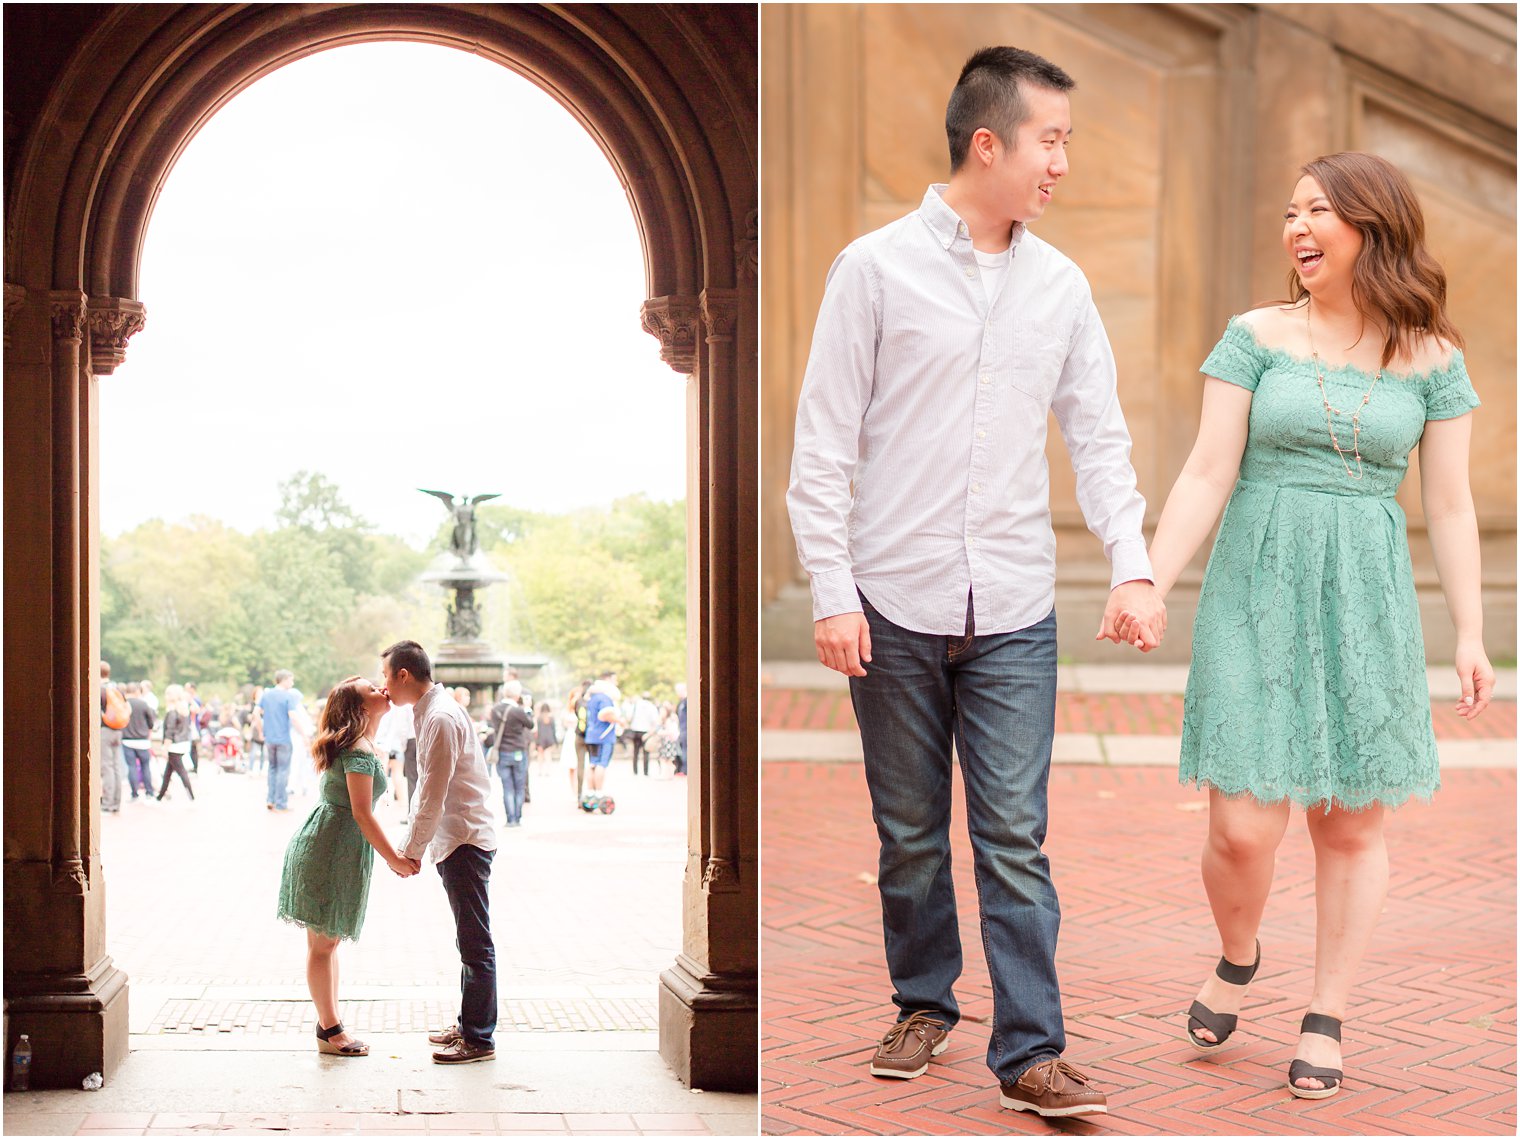 Engagement photos at Bethesda Fountain in Central Park by Idalia Photography